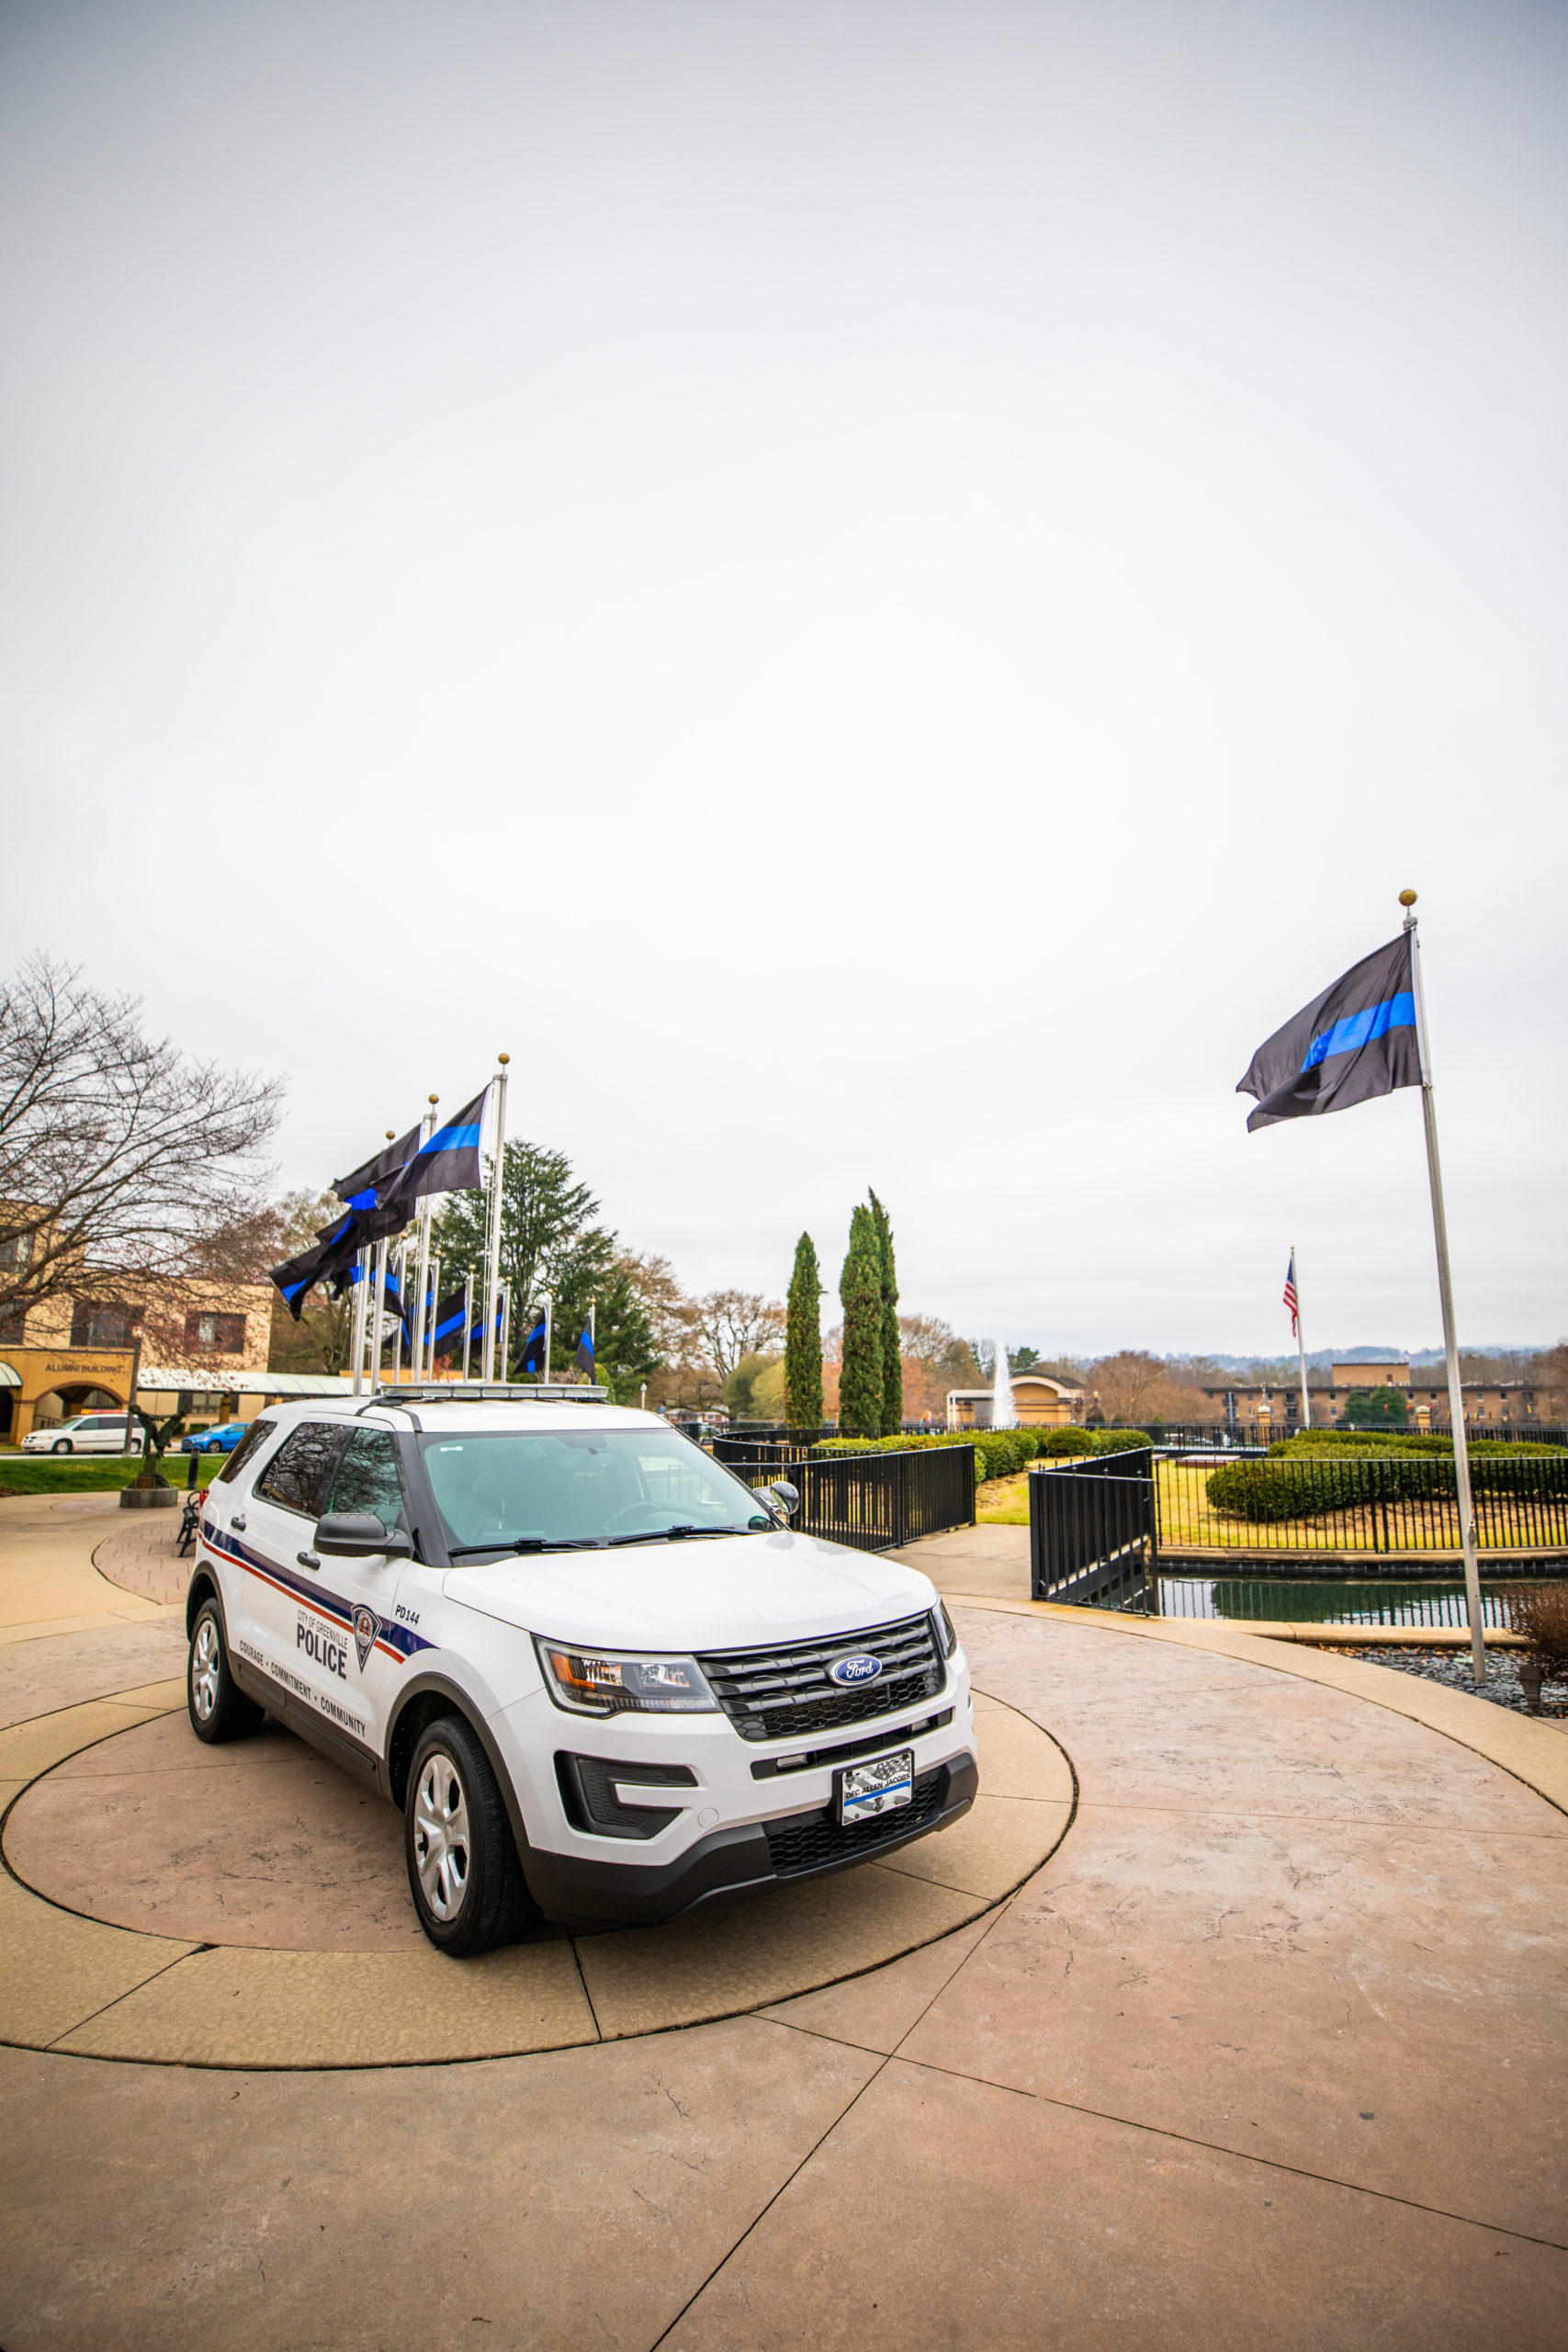 Police car and flags on front campus to honor fallen police officer Allen Jacobs, BJU, March 17, 2021. (Derek Eckenroth)